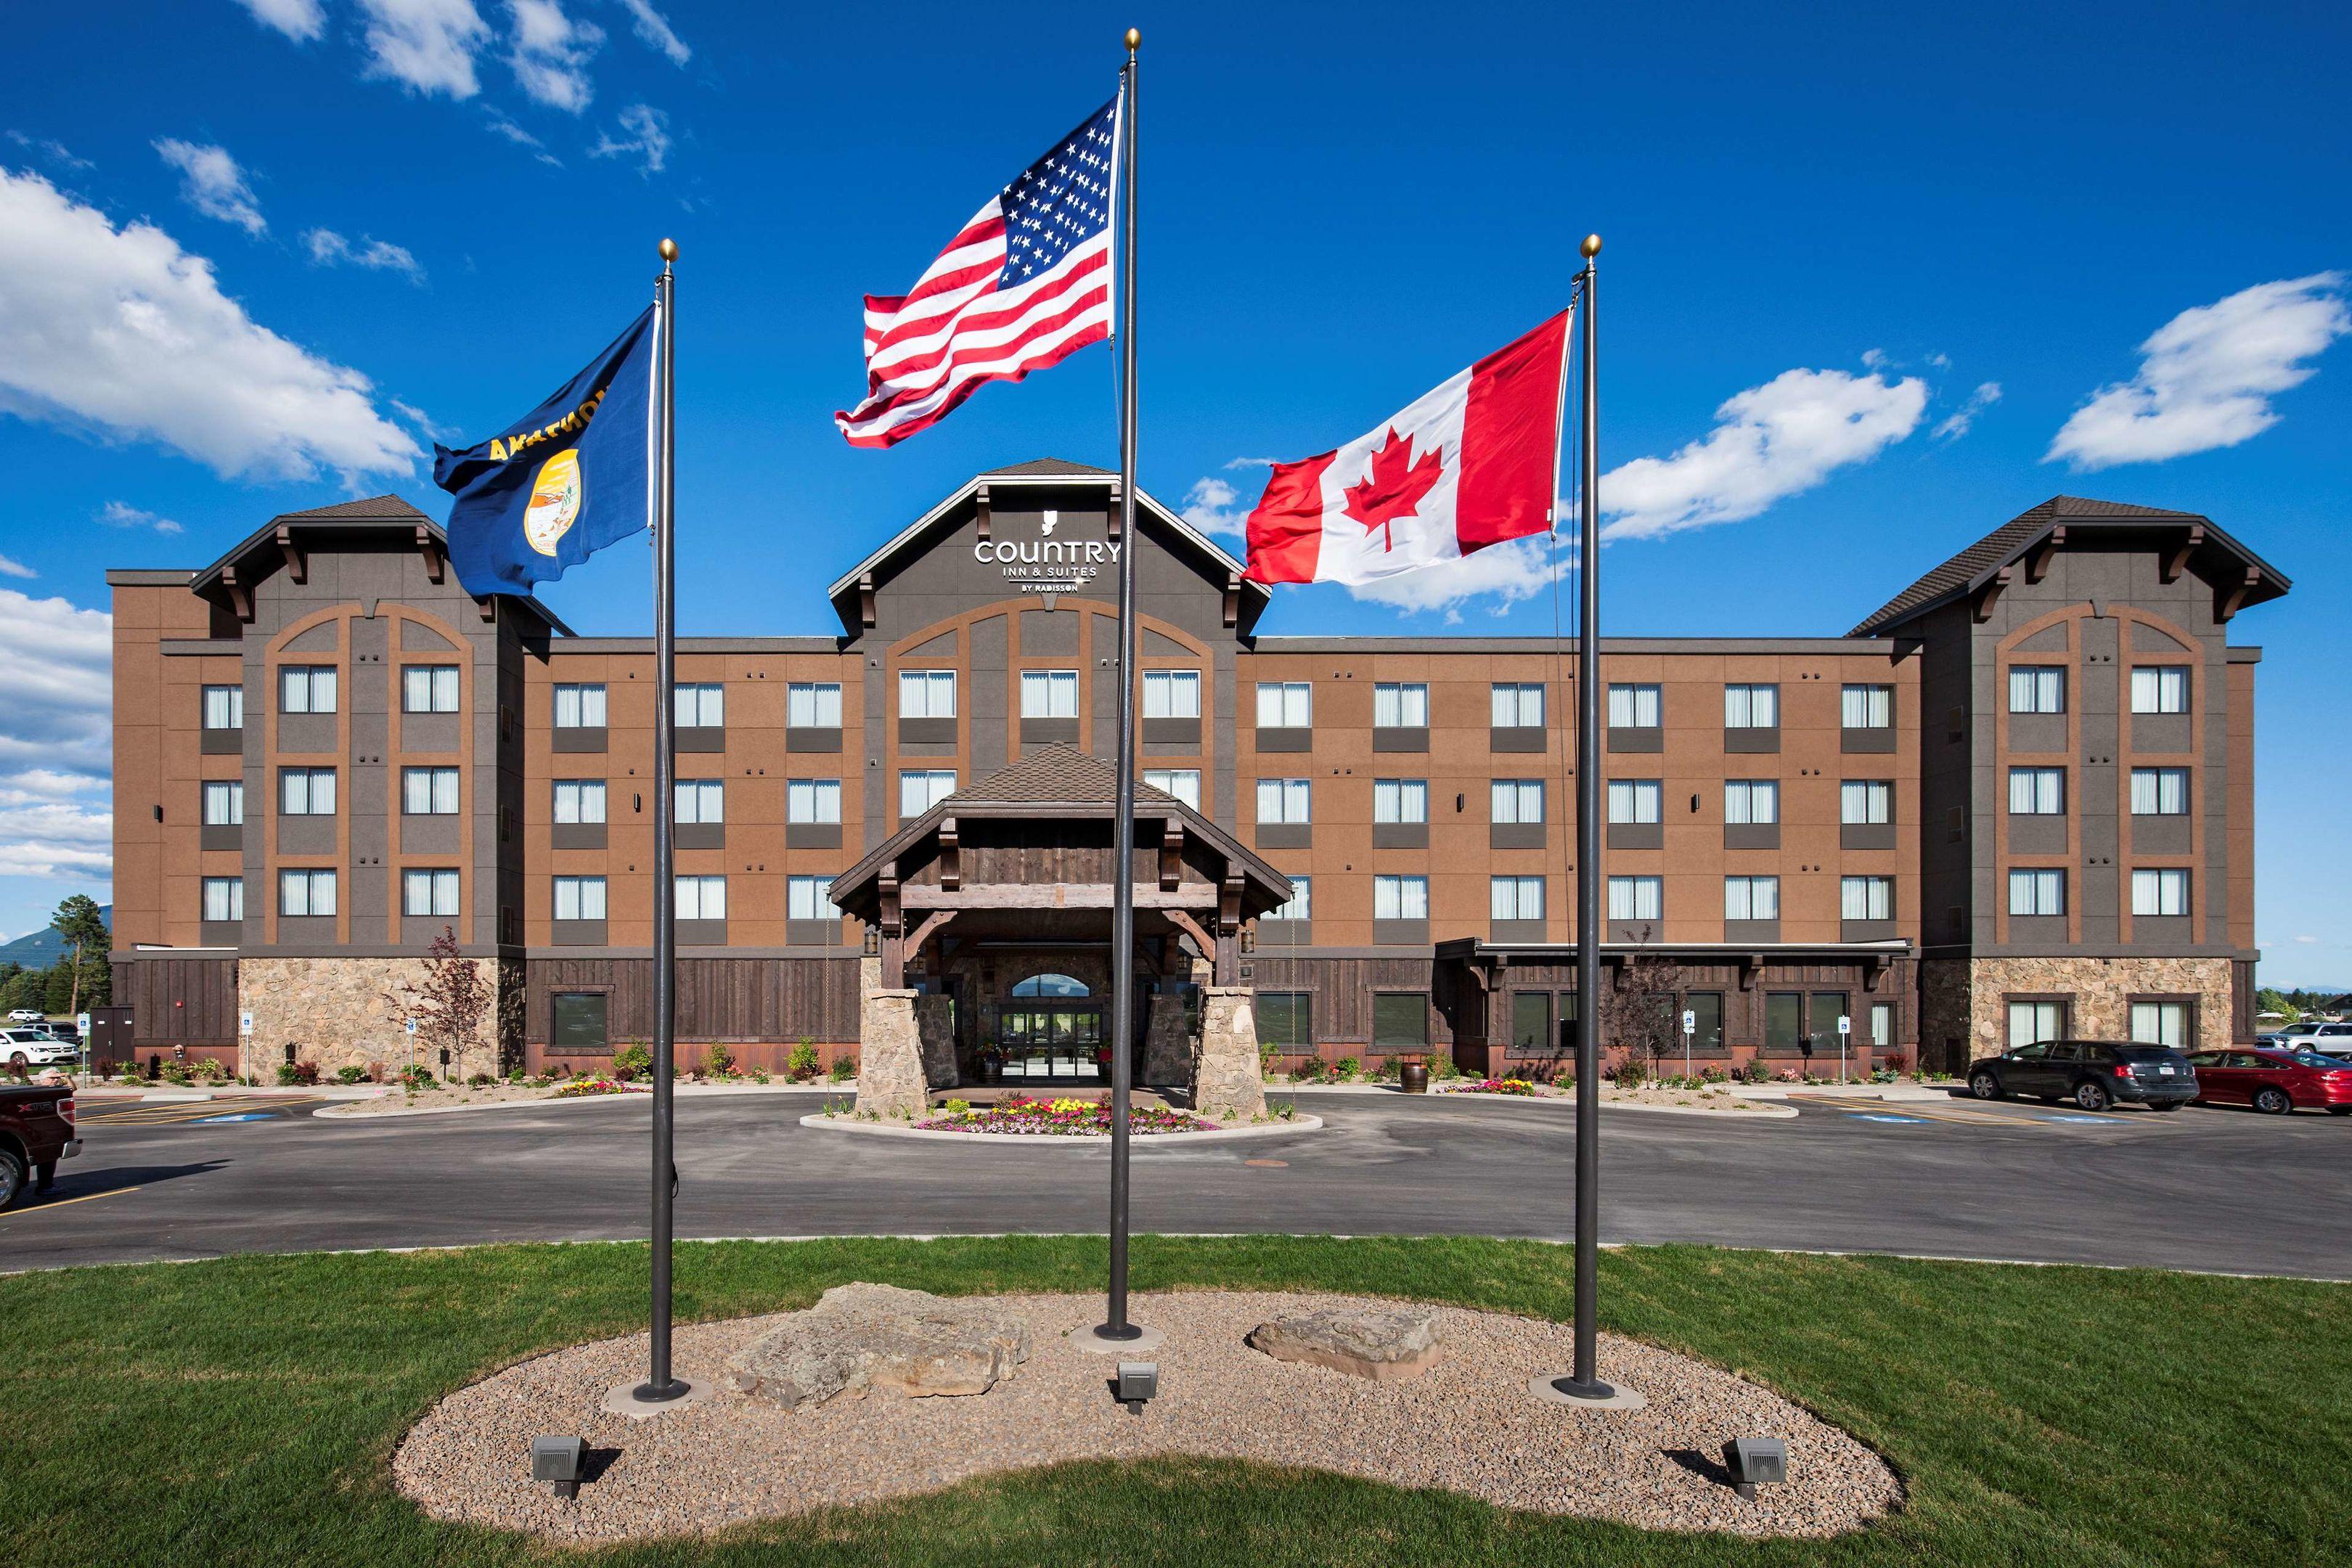 Country Inn & Suites by Radisson Kalispell MT Glacier Lodge